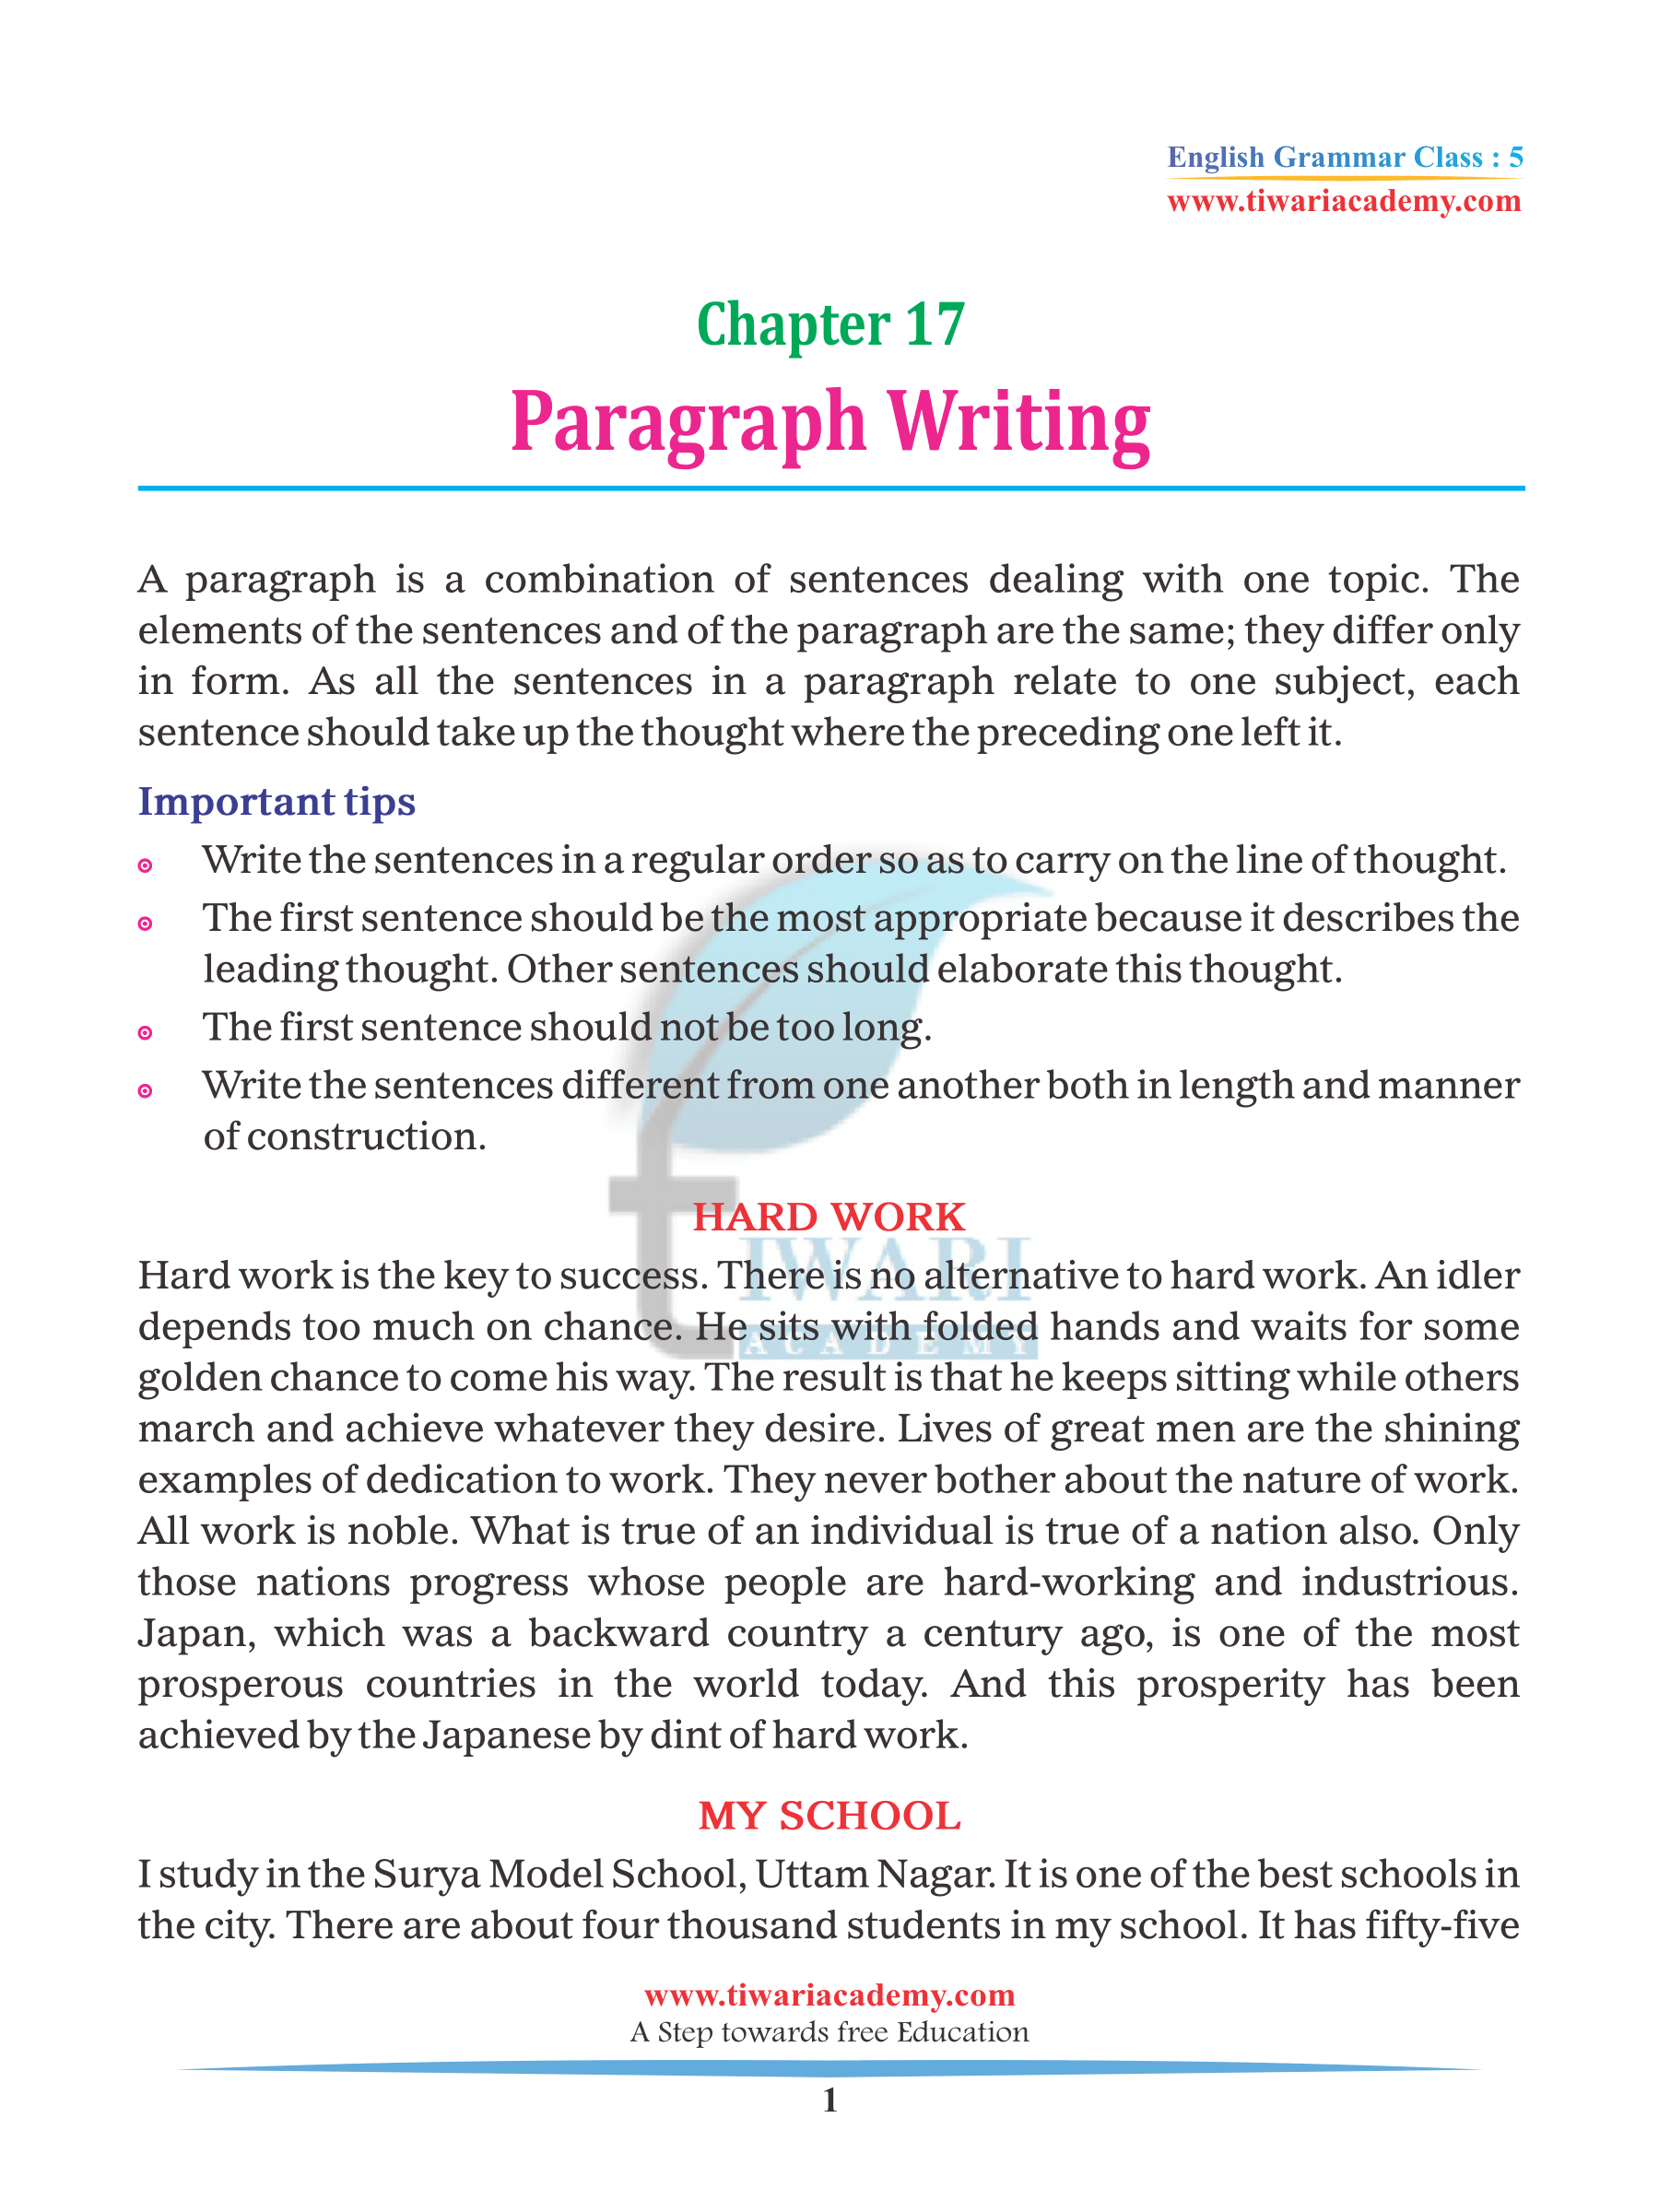 essay for class 5 in english